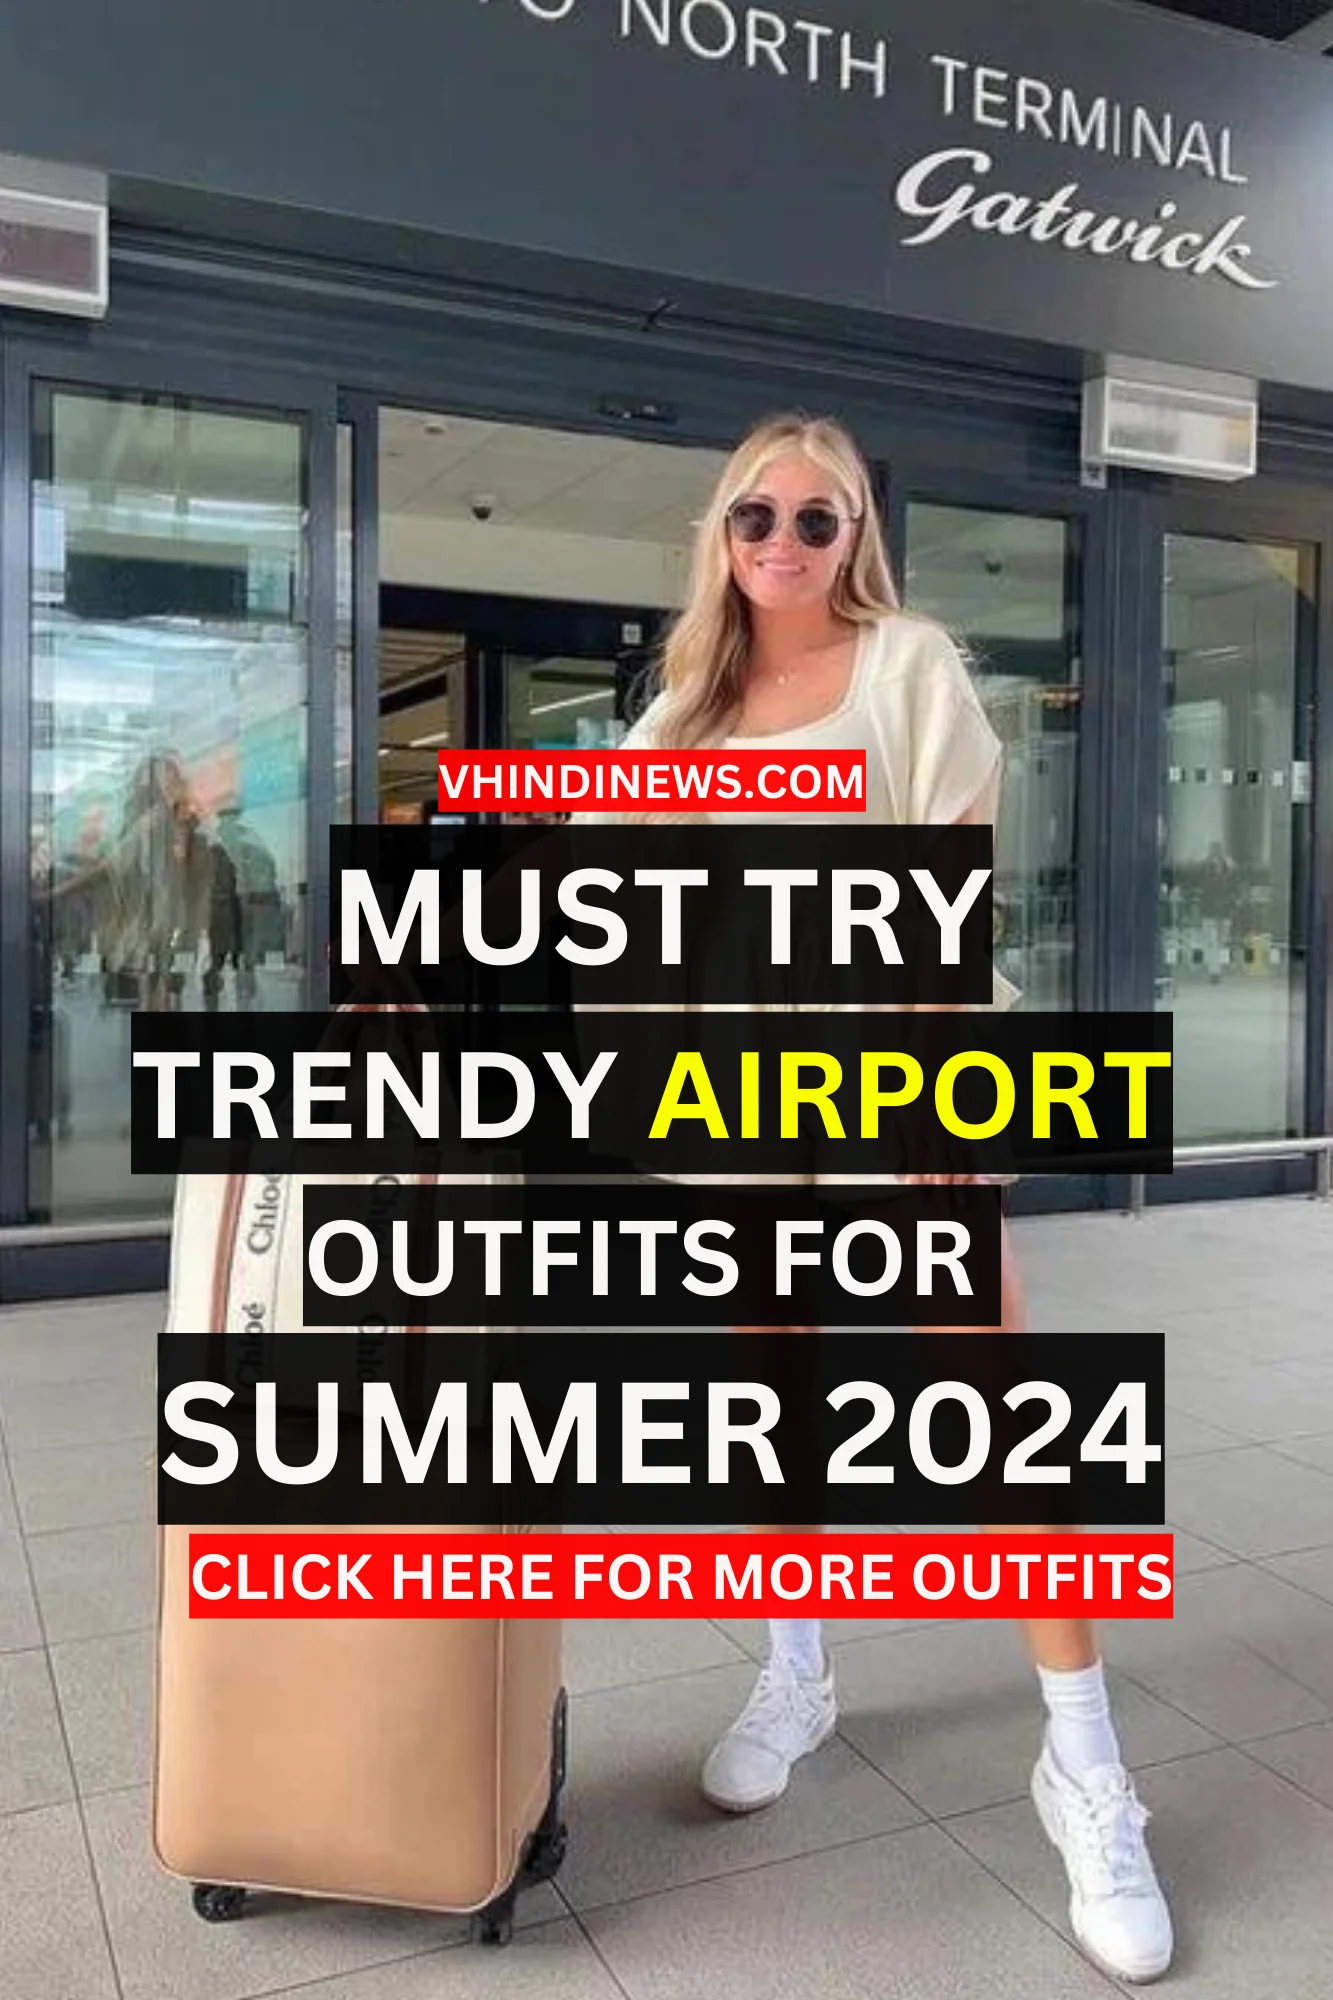 AIRPORT OUTFIT FOR SUMMER 2024 1